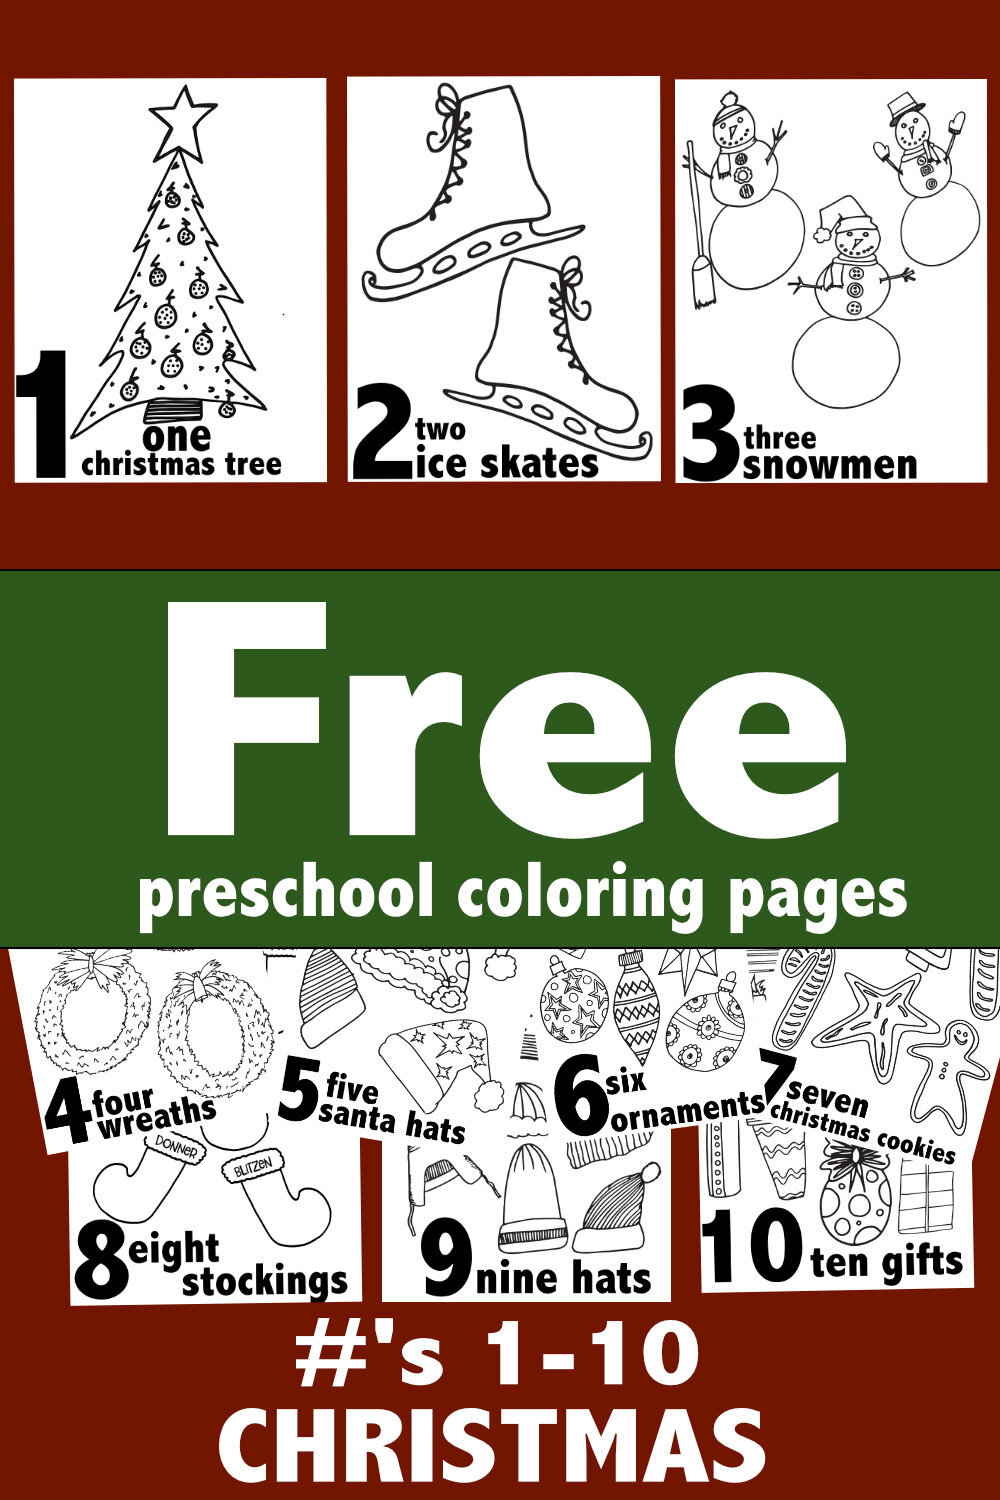 Free Christmas Coloring Pages For Preschool - Numbers 1-10